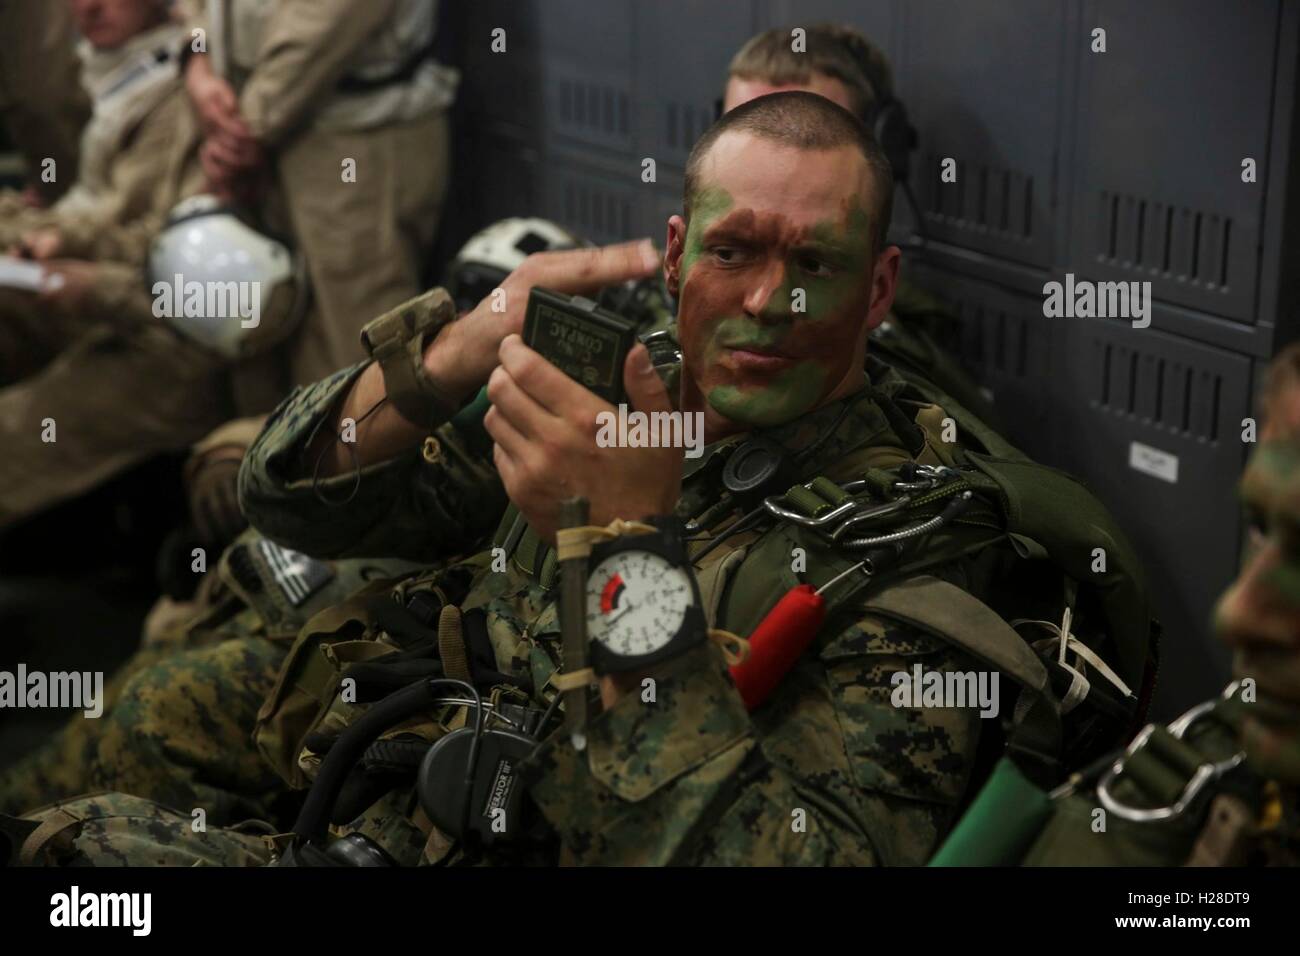 A U.S. Marine paints his face with camouflage in preparation for a mission March 1, 2015 of the coast of San Diego, California. Stock Photo